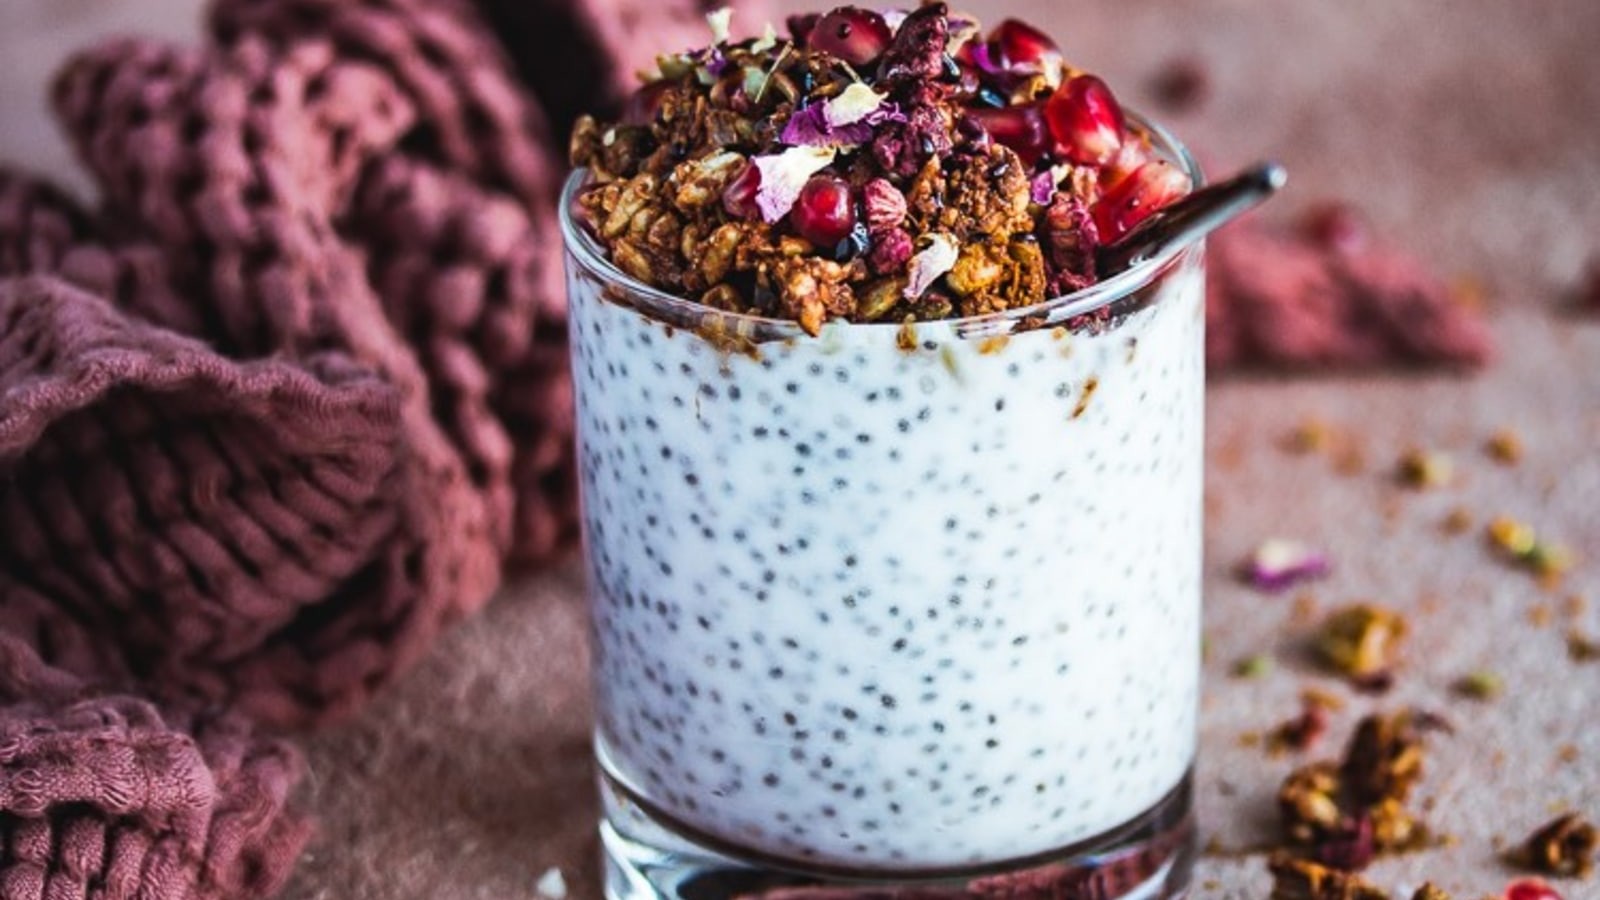 Image of Chia Pudding with berries and nut butters